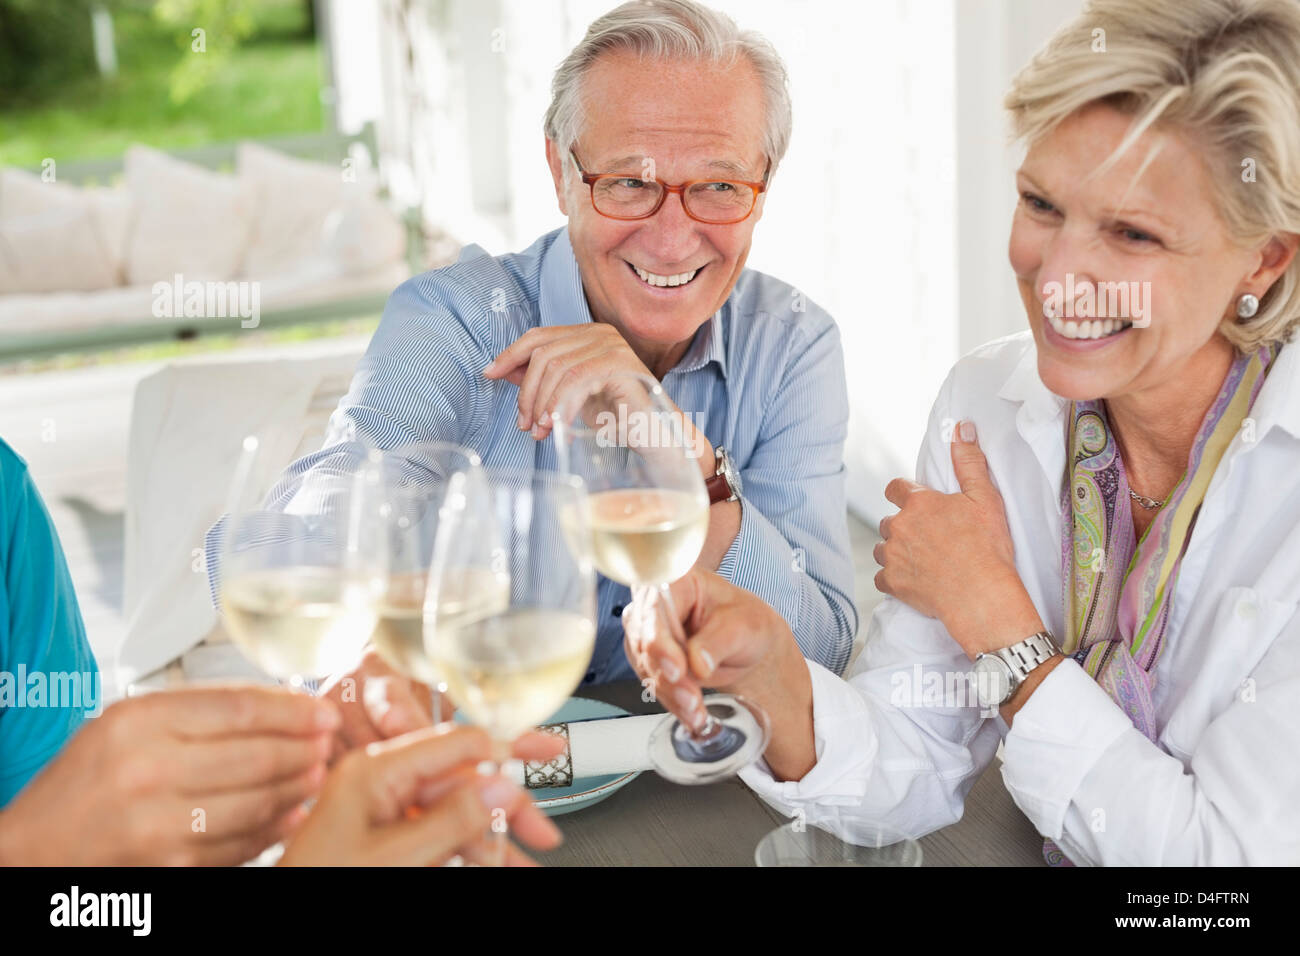 Friends toasting each other with wine Banque D'Images